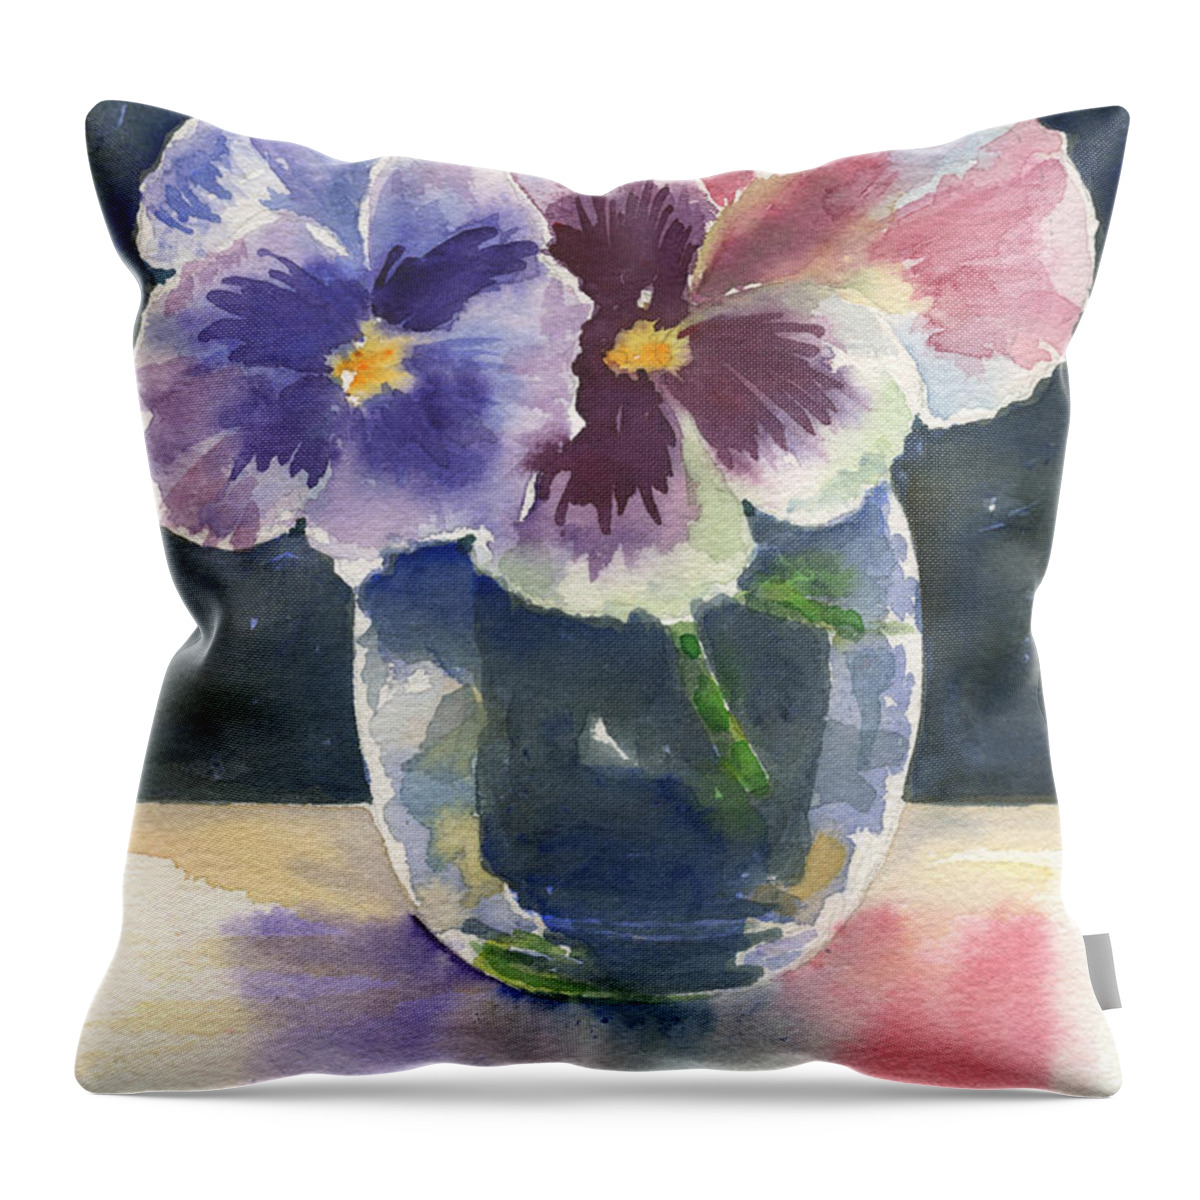 Pansies Throw Pillow featuring the painting Pansies by Marsha Elliott